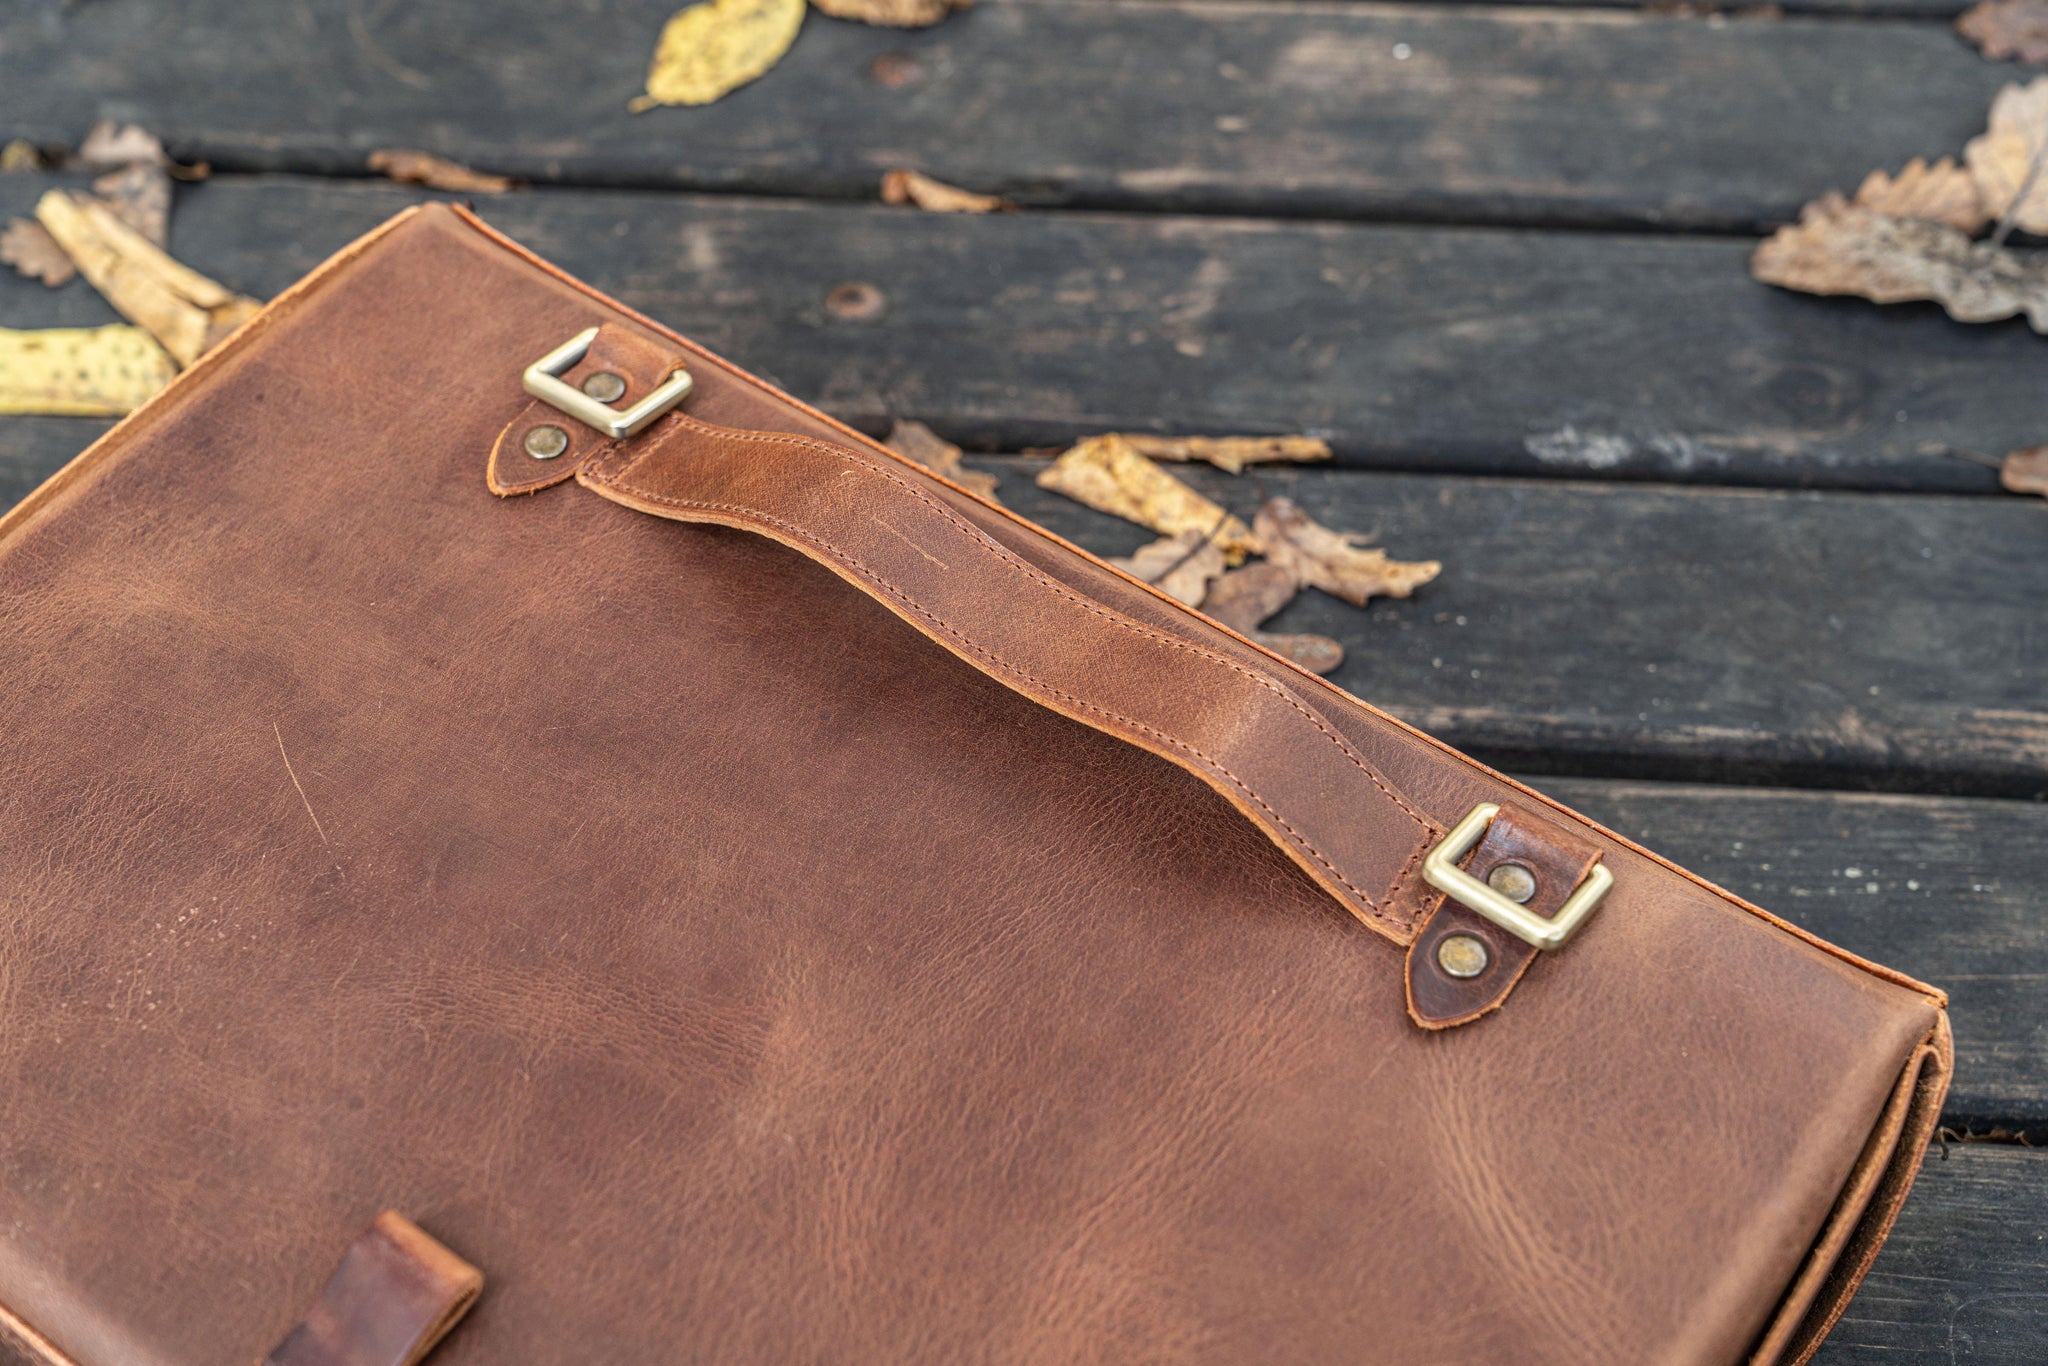 Handmade Leather Tote Bag - Crazy Horse Tan - Galen Leather